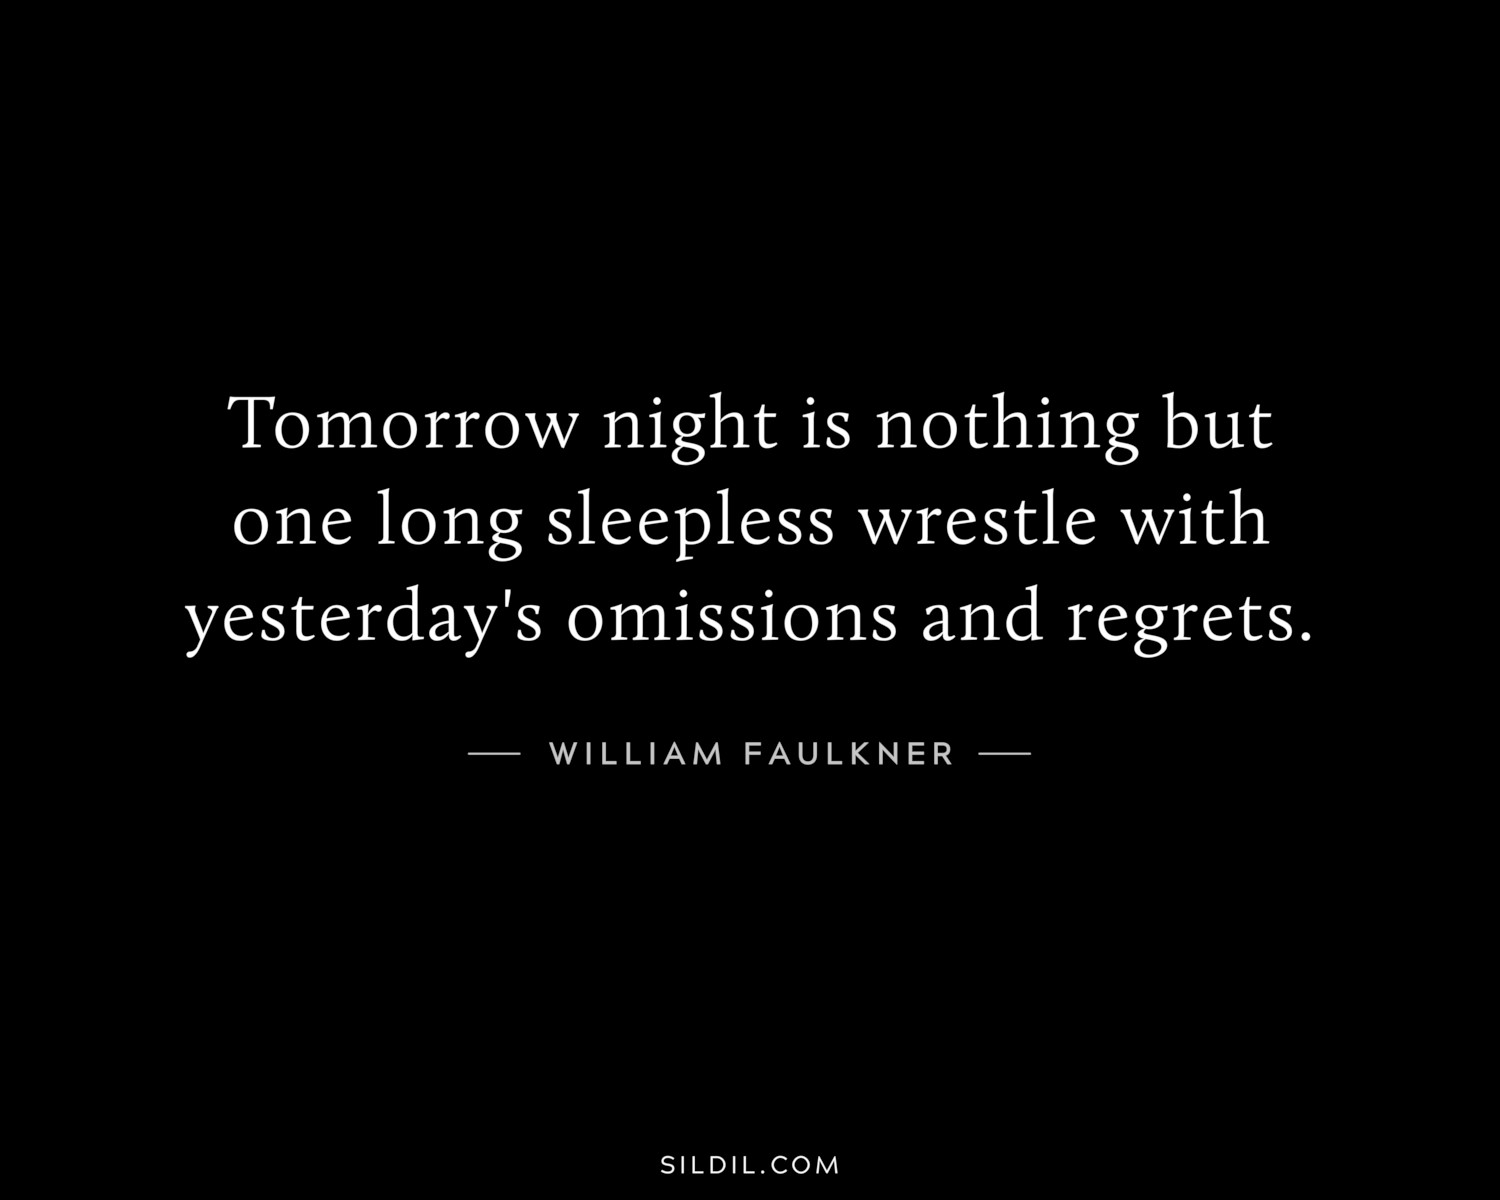 Tomorrow night is nothing but one long sleepless wrestle with yesterday's omissions and regrets.